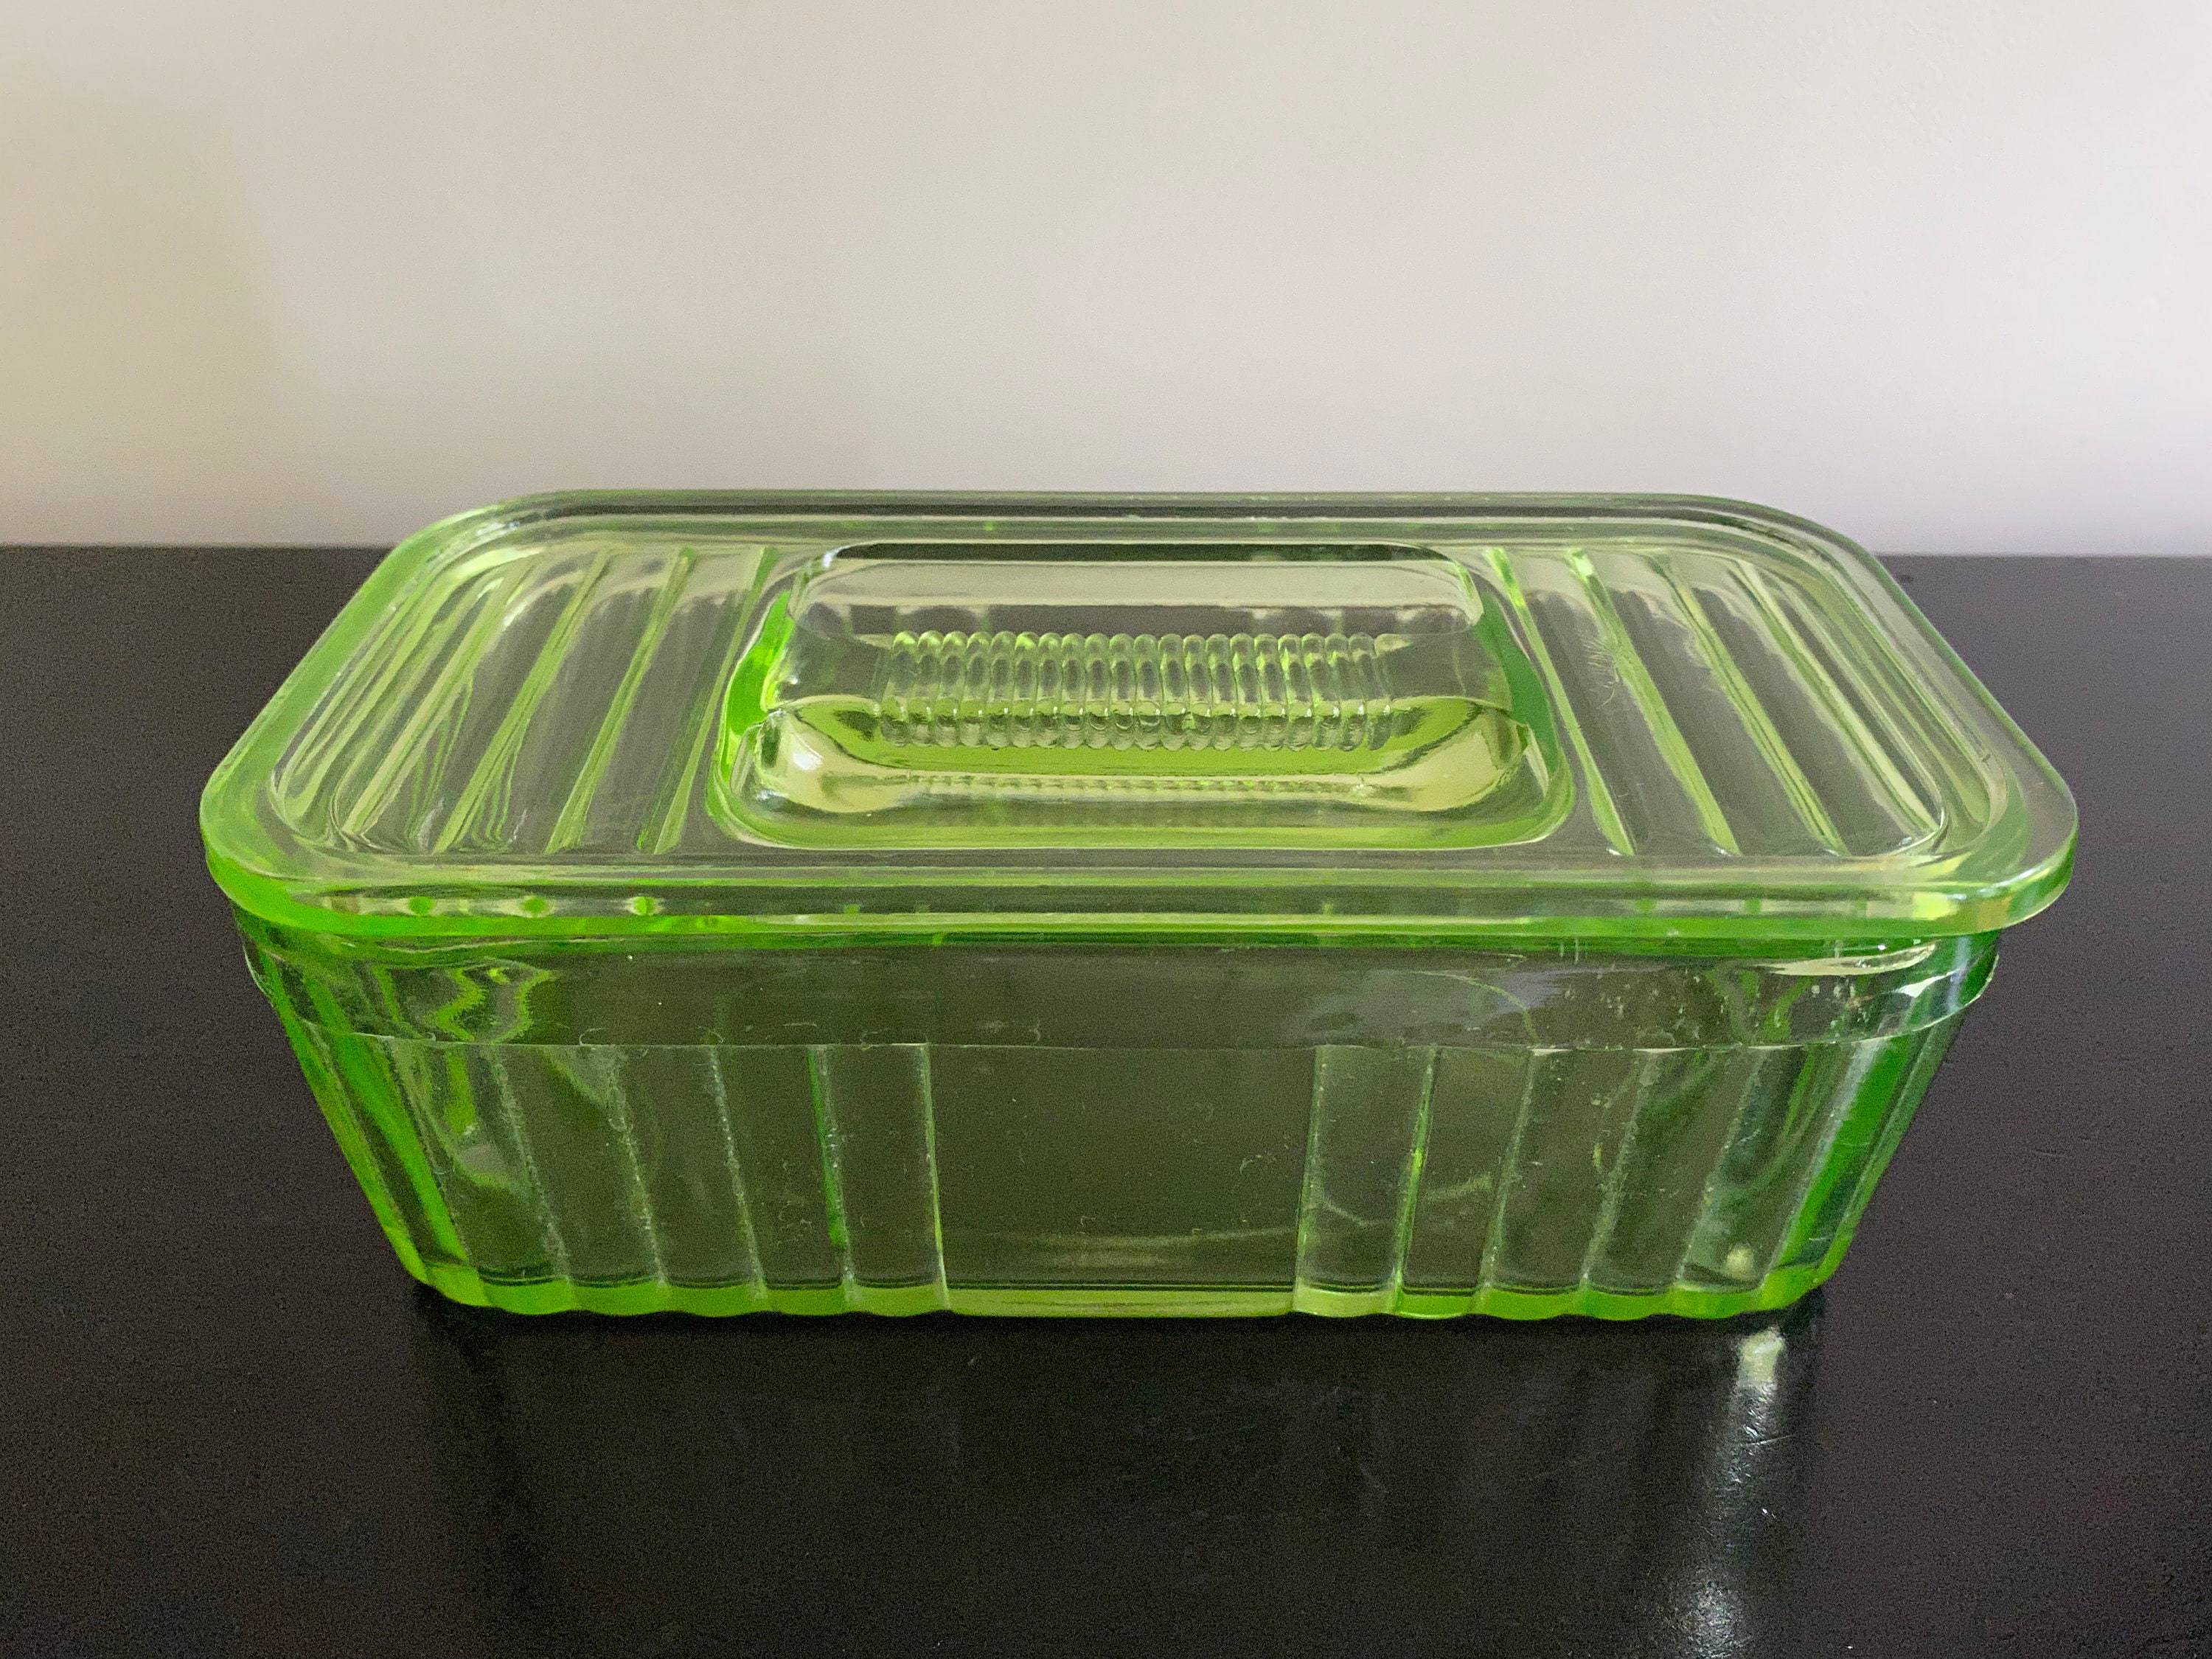 Wholesale Rectangular Food Container- Green- 50oz GREEN W/CLEAR GLASS